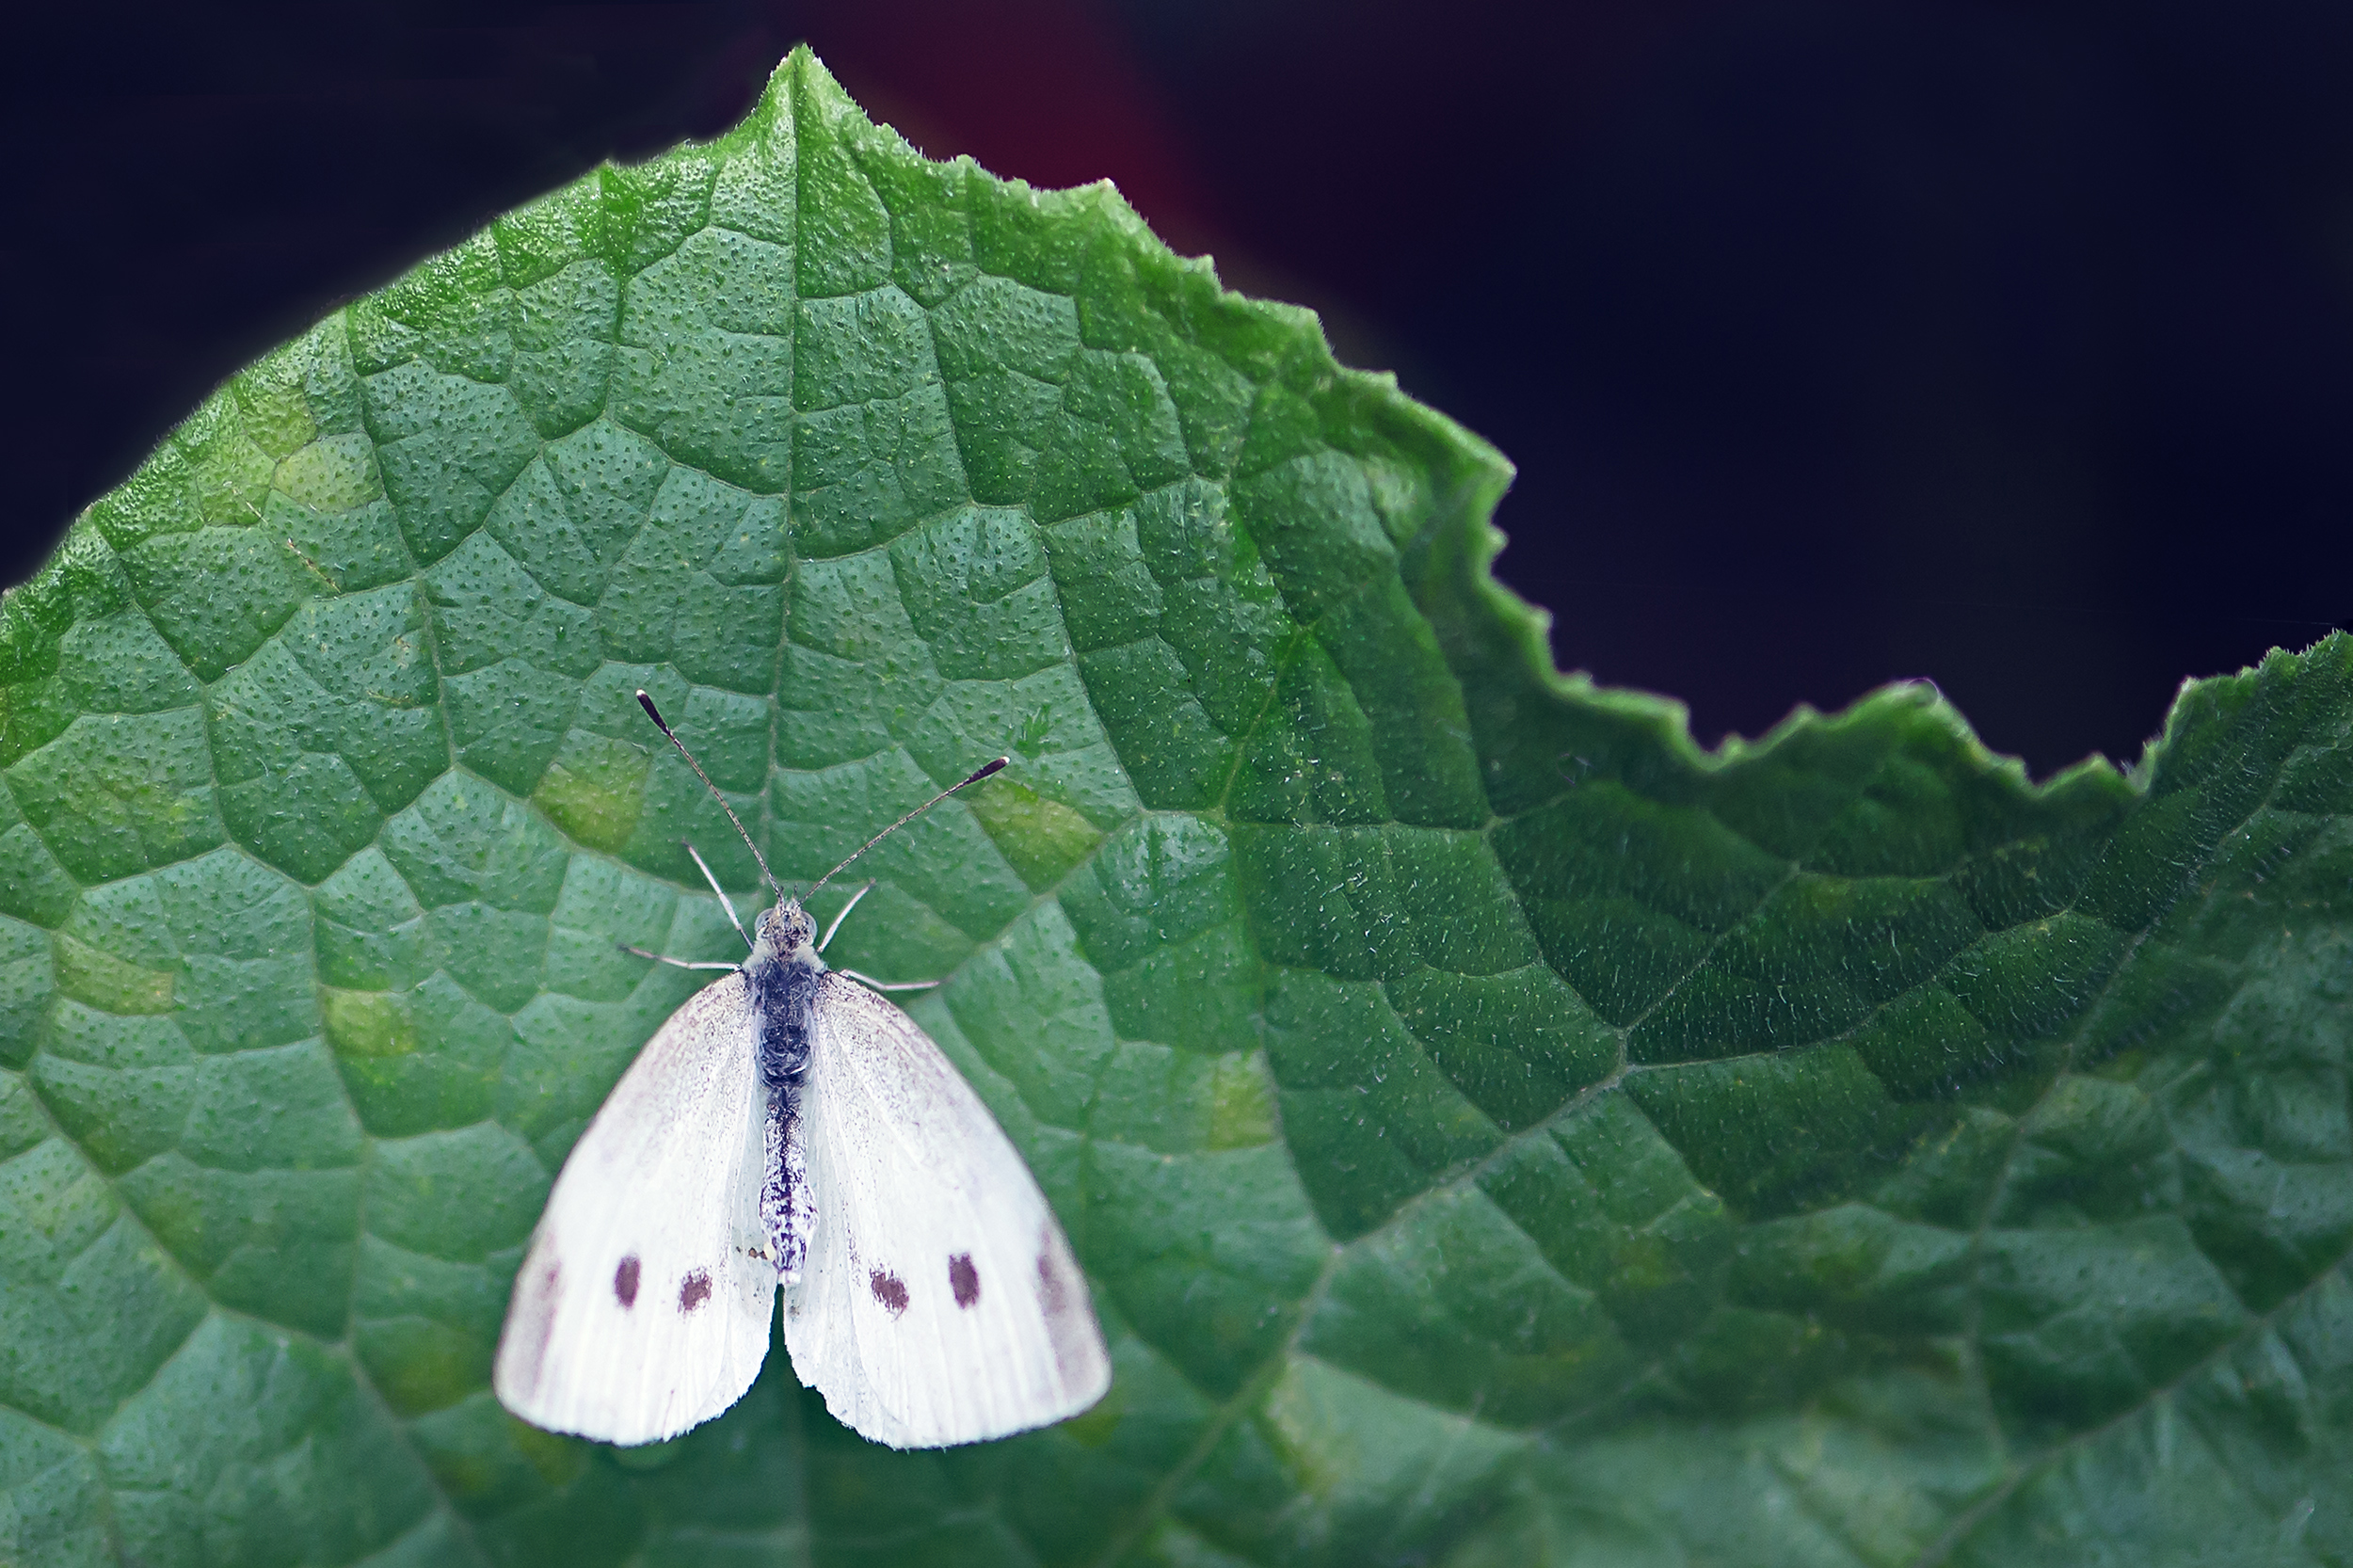 is it possible to rid your garden of voracious white cabbage butterflies?